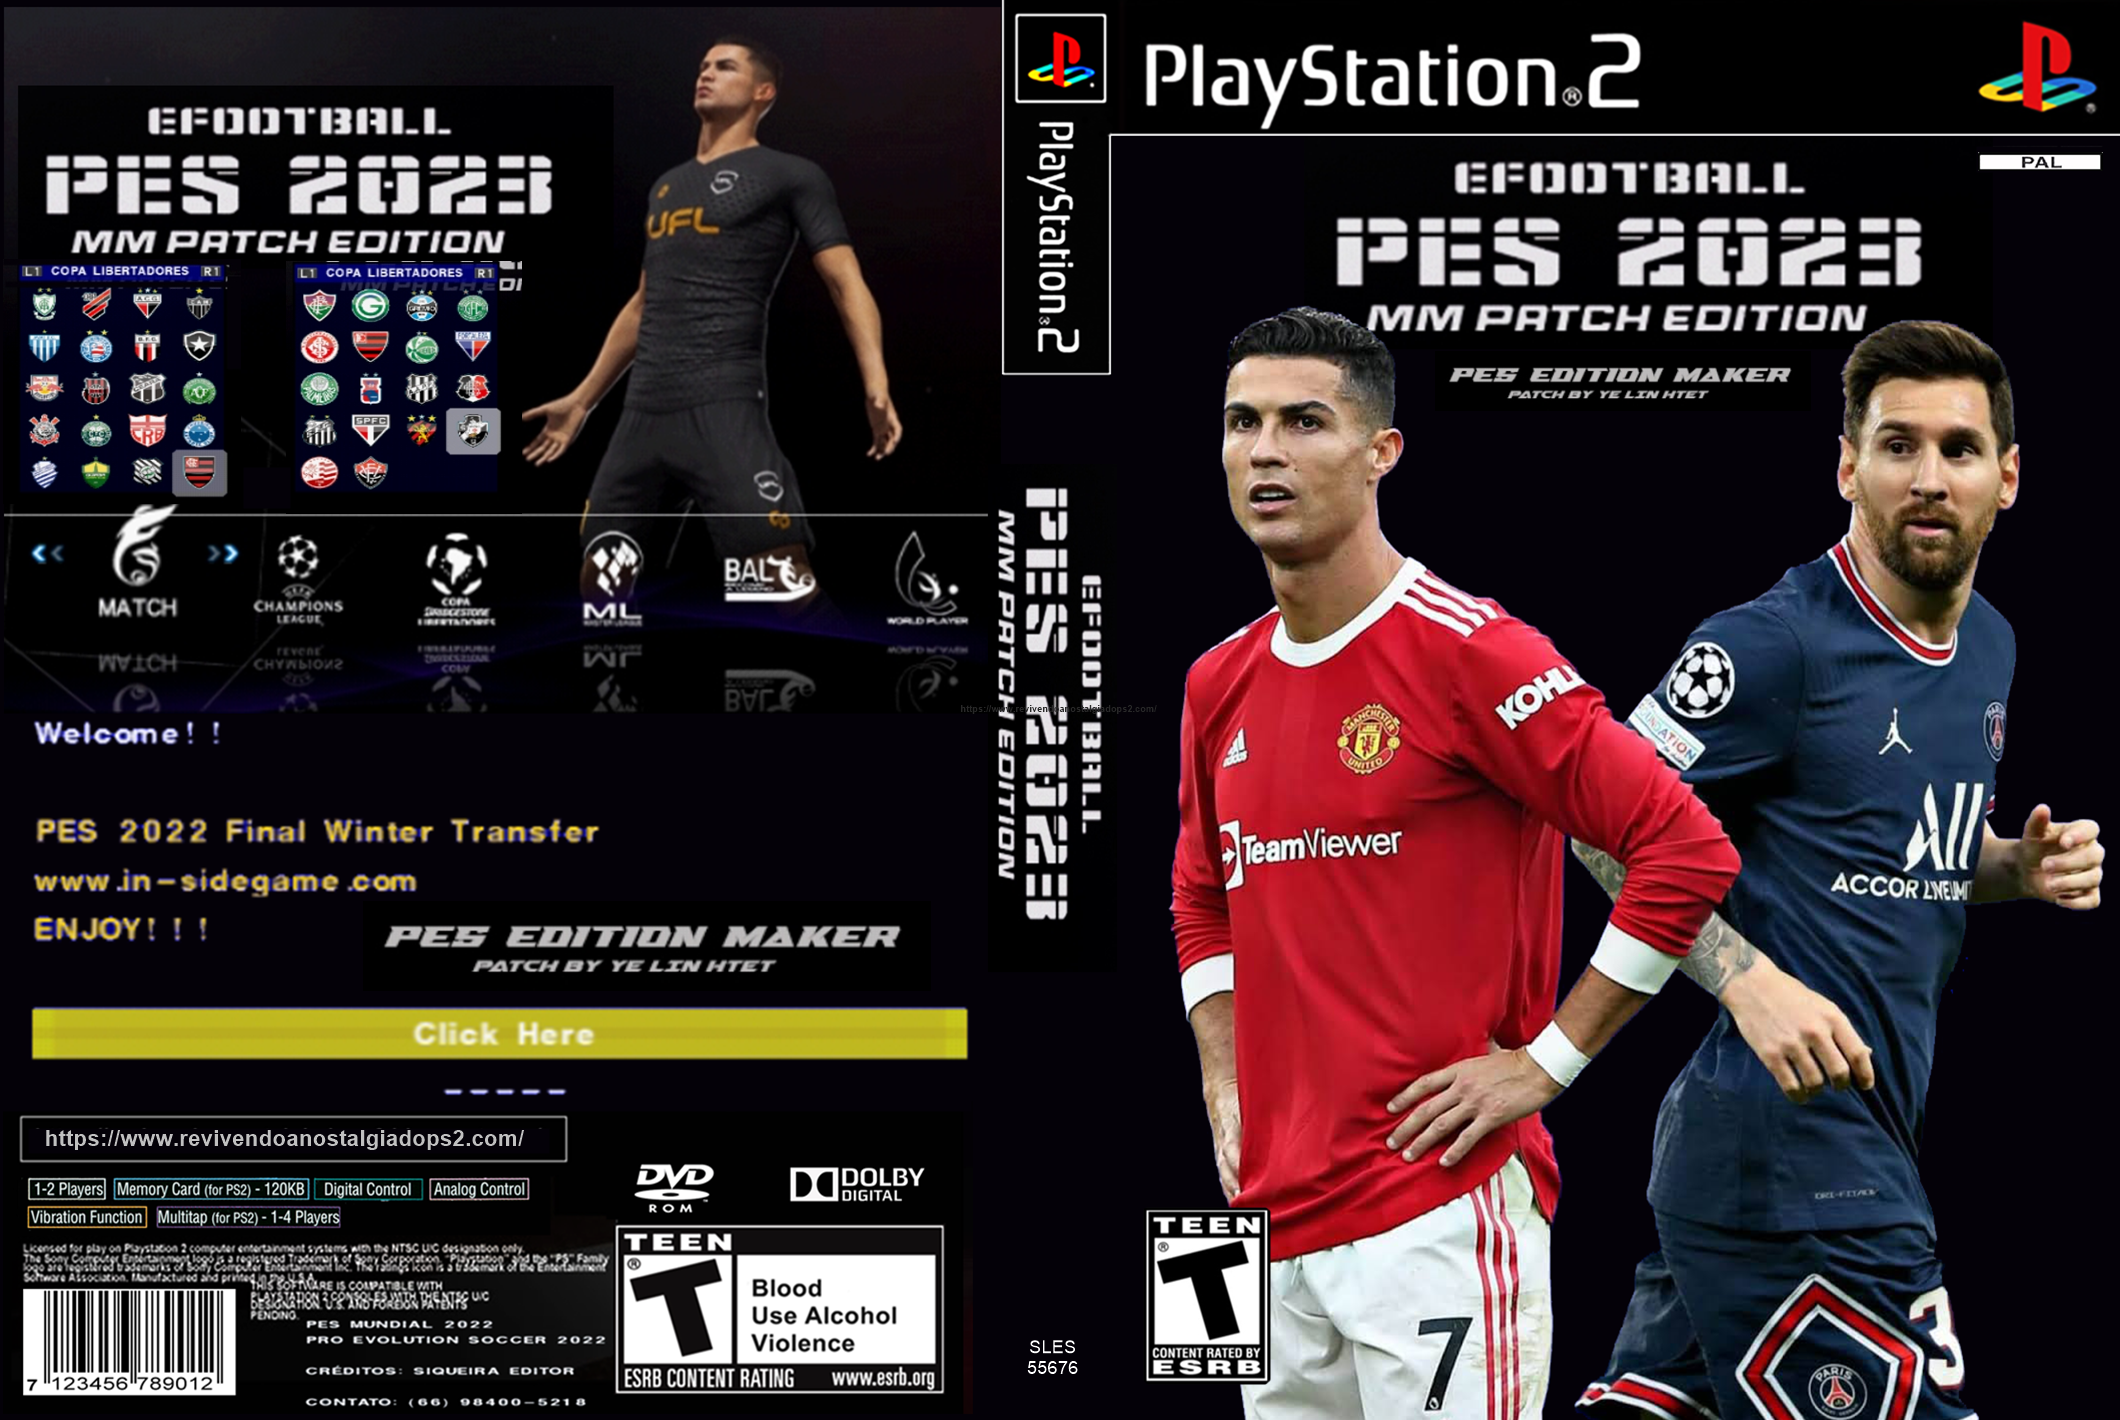 SLES_556.76.Pes 2023 - E-Football 2023 (Version English) : Free Download,  Borrow, and Streaming : Internet Archive